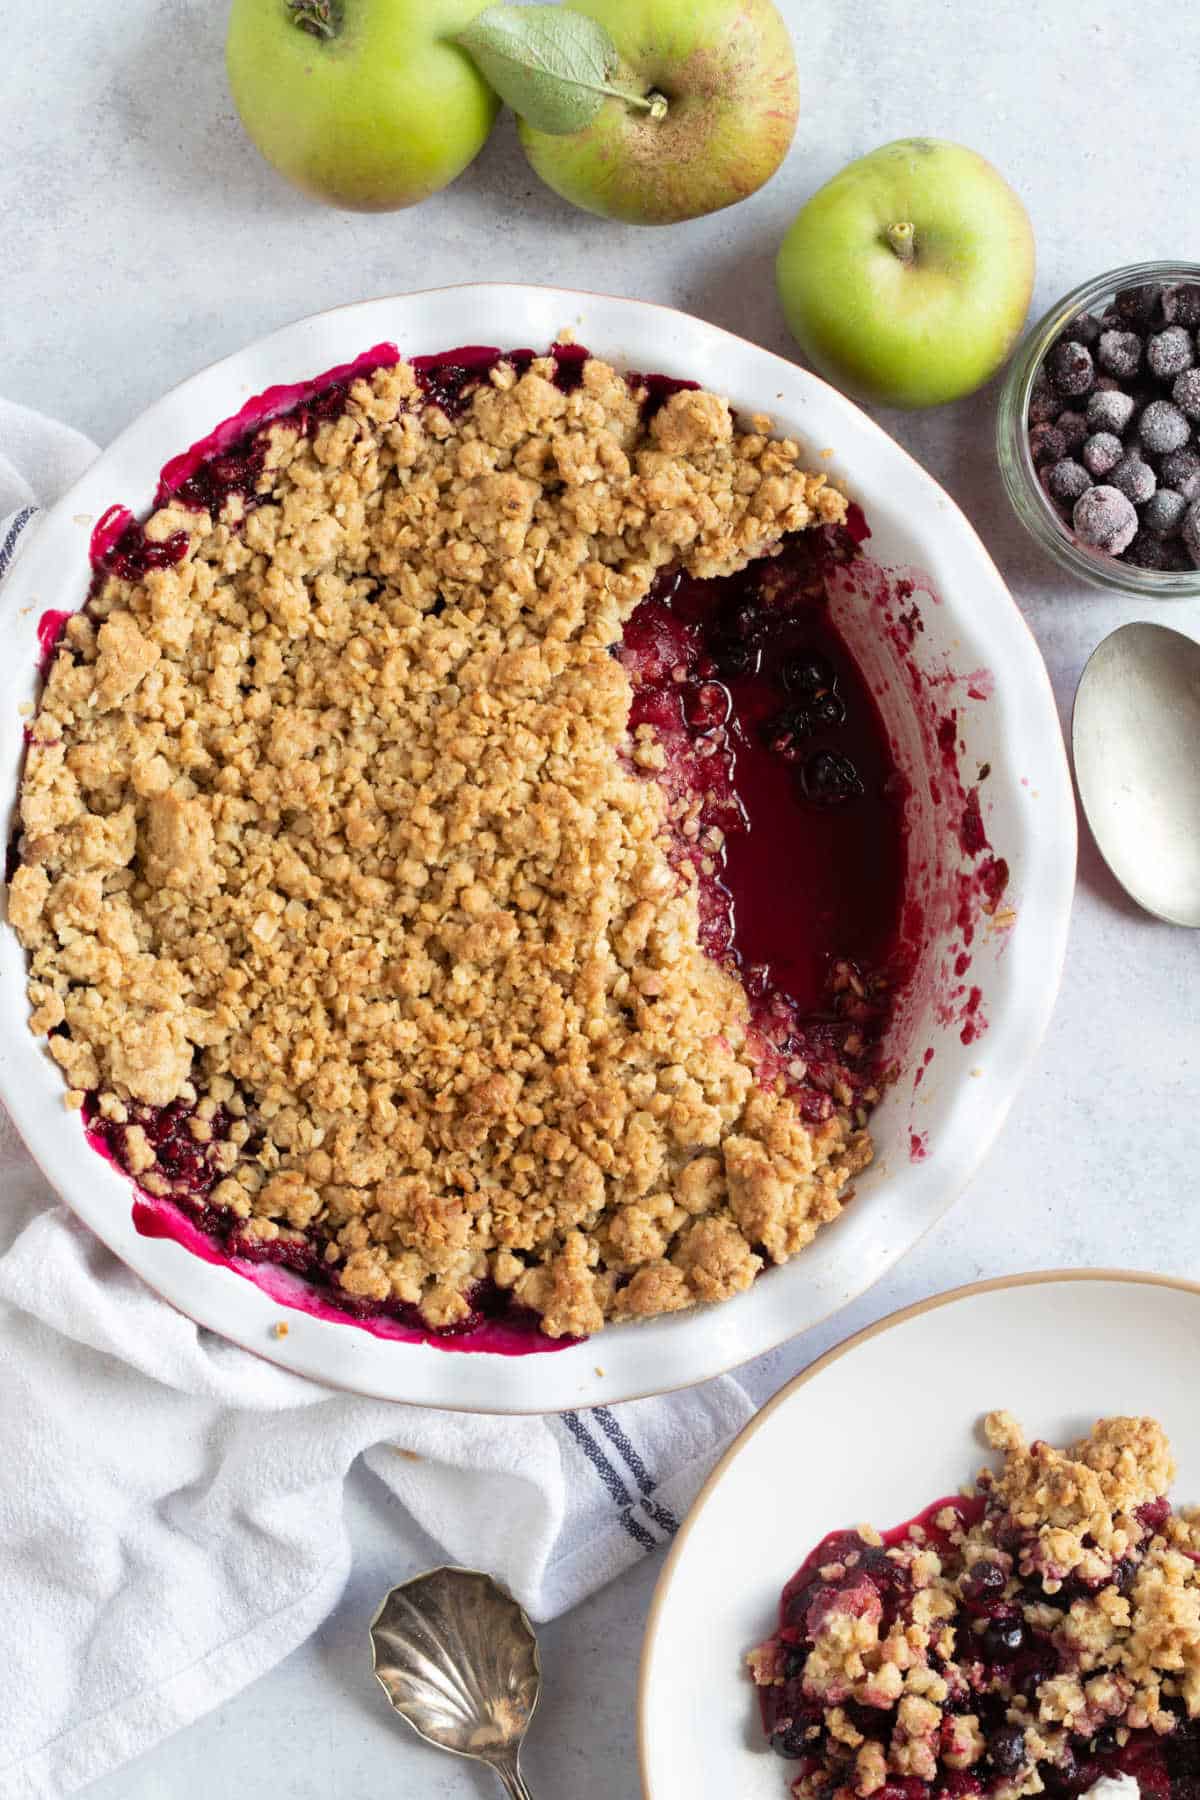 Blackcurrant and apple crumble in a pie dish with a bowl of crumble on the side.